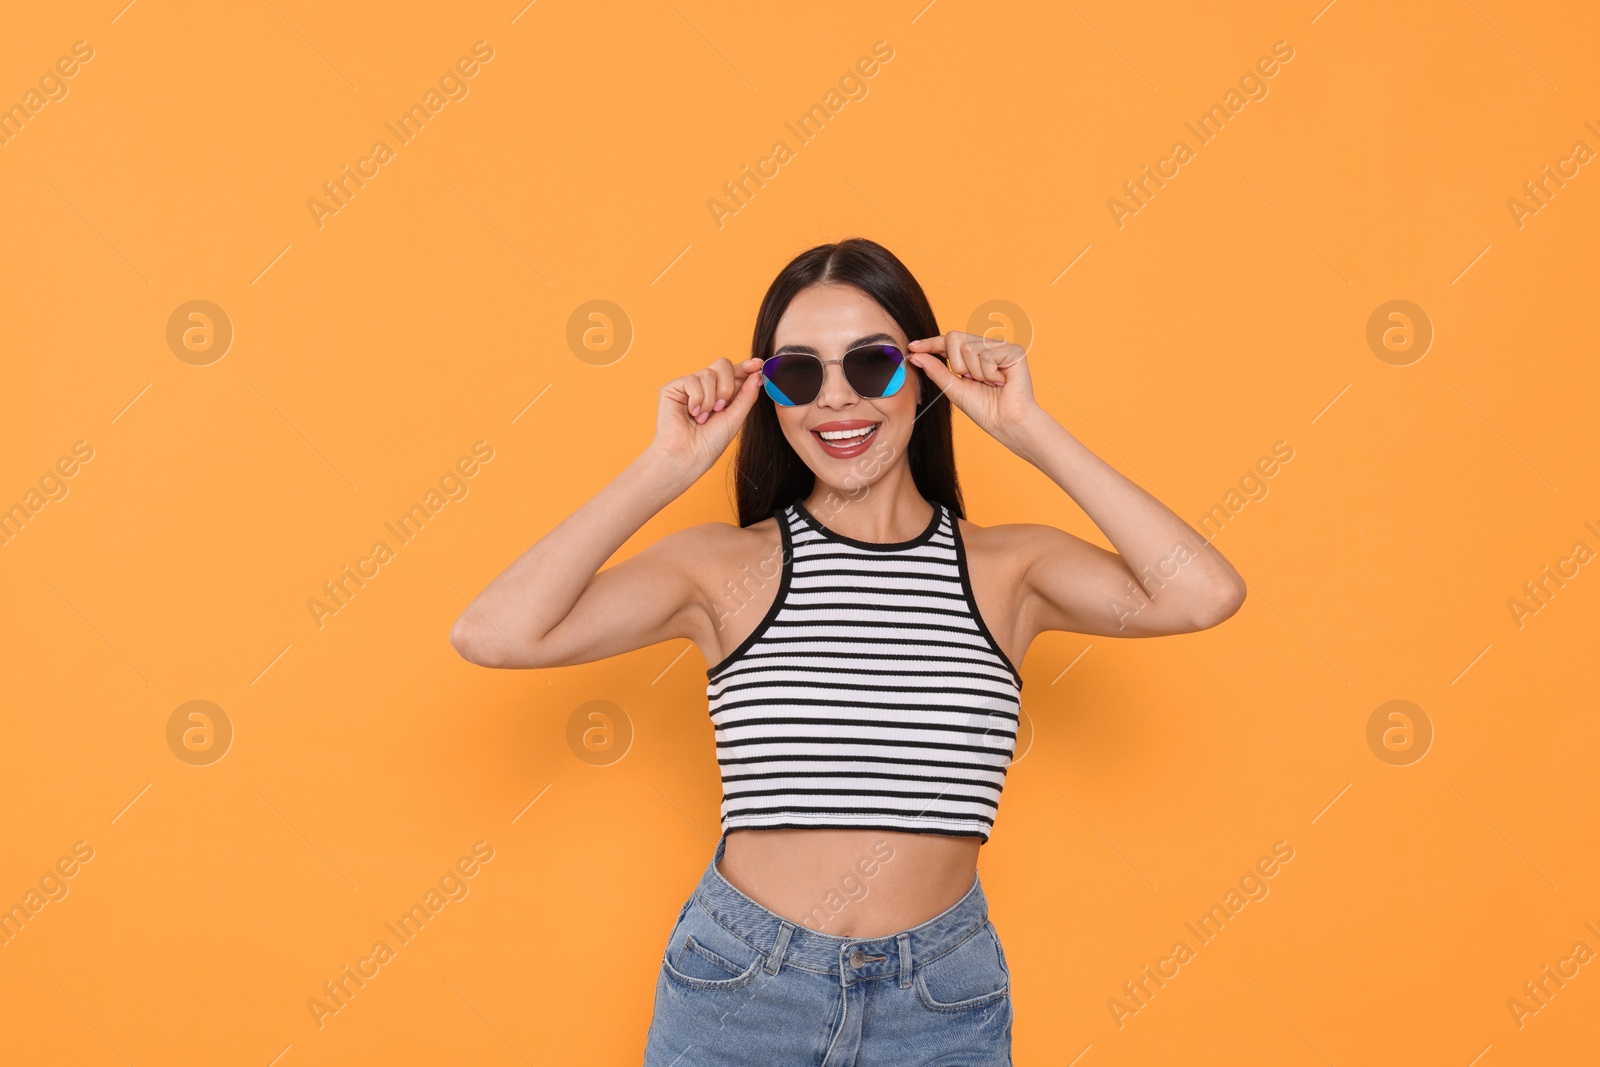 Photo of Attractive happy woman touching fashionable sunglasses against orange background